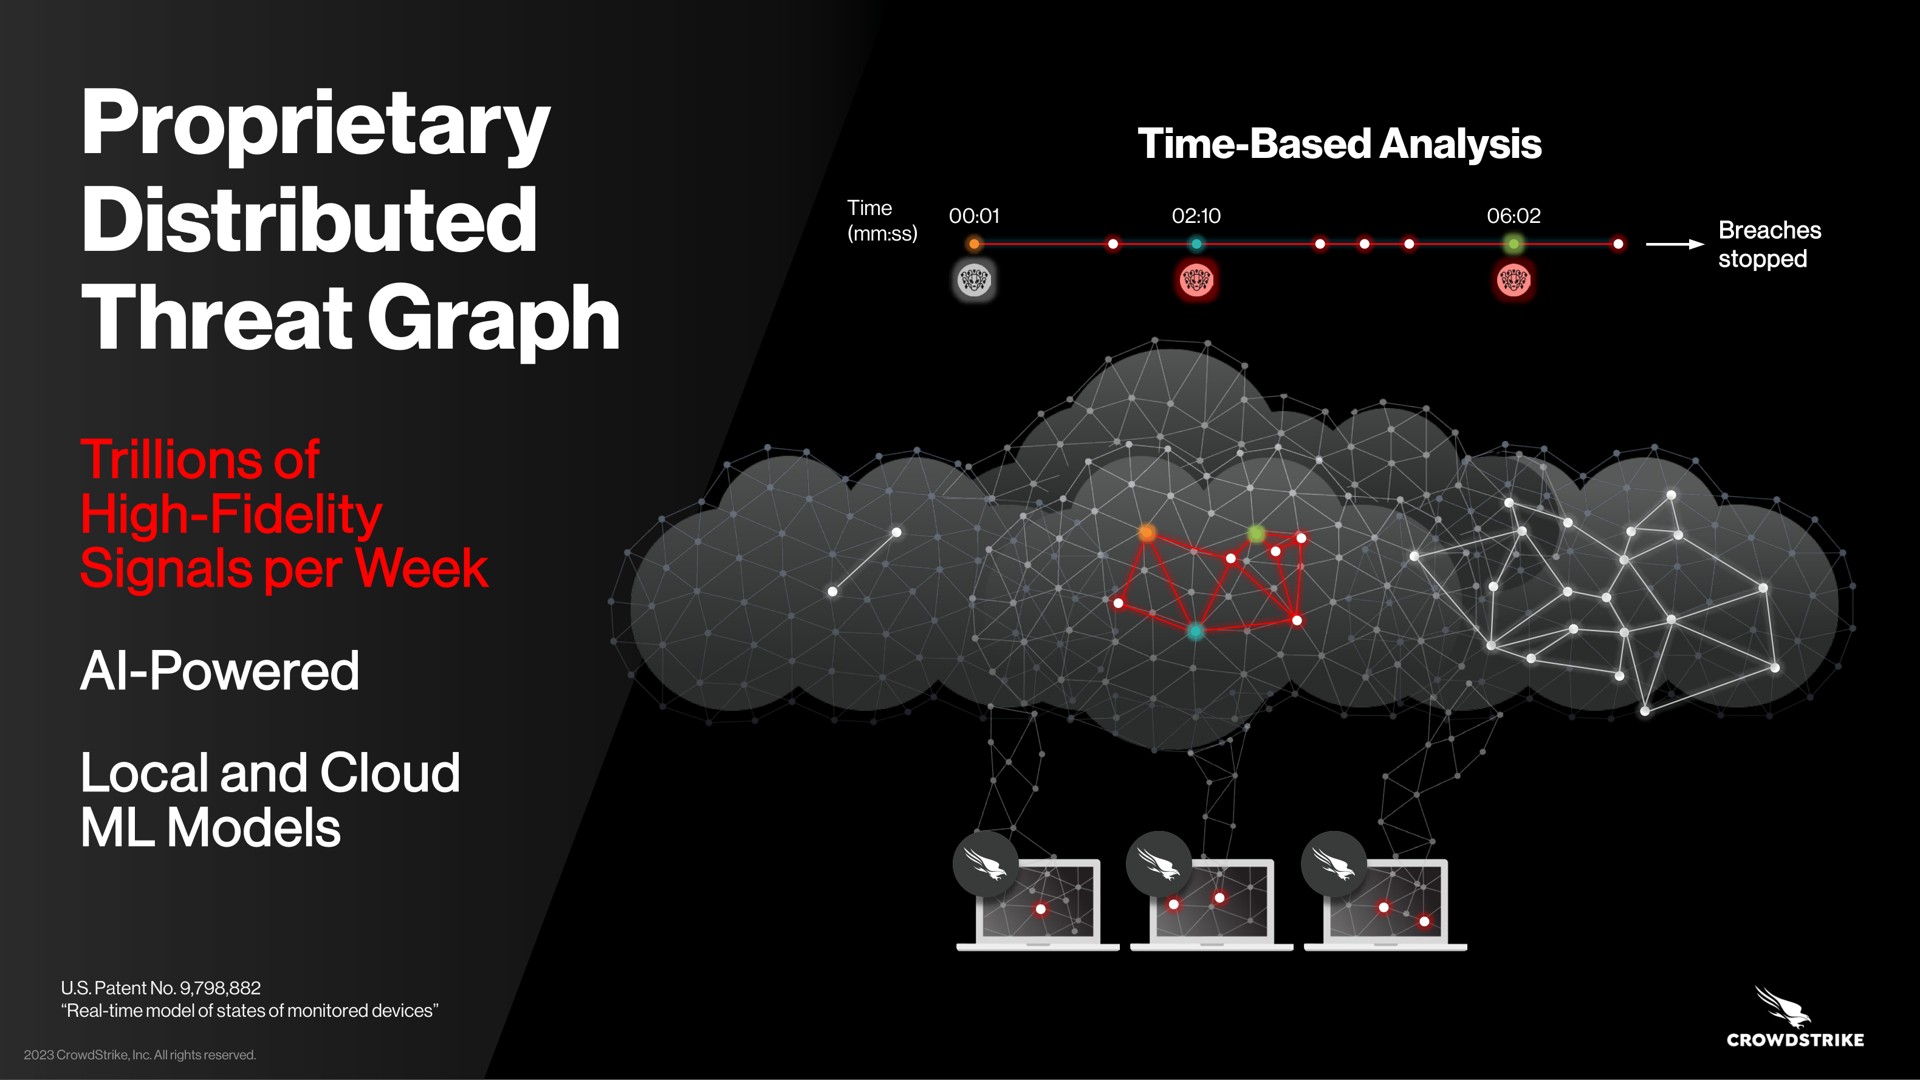 proprietary distributed threat graph trillions of high fidelity signals per week powered local and cloud models go breaches powered | Crowdstrike